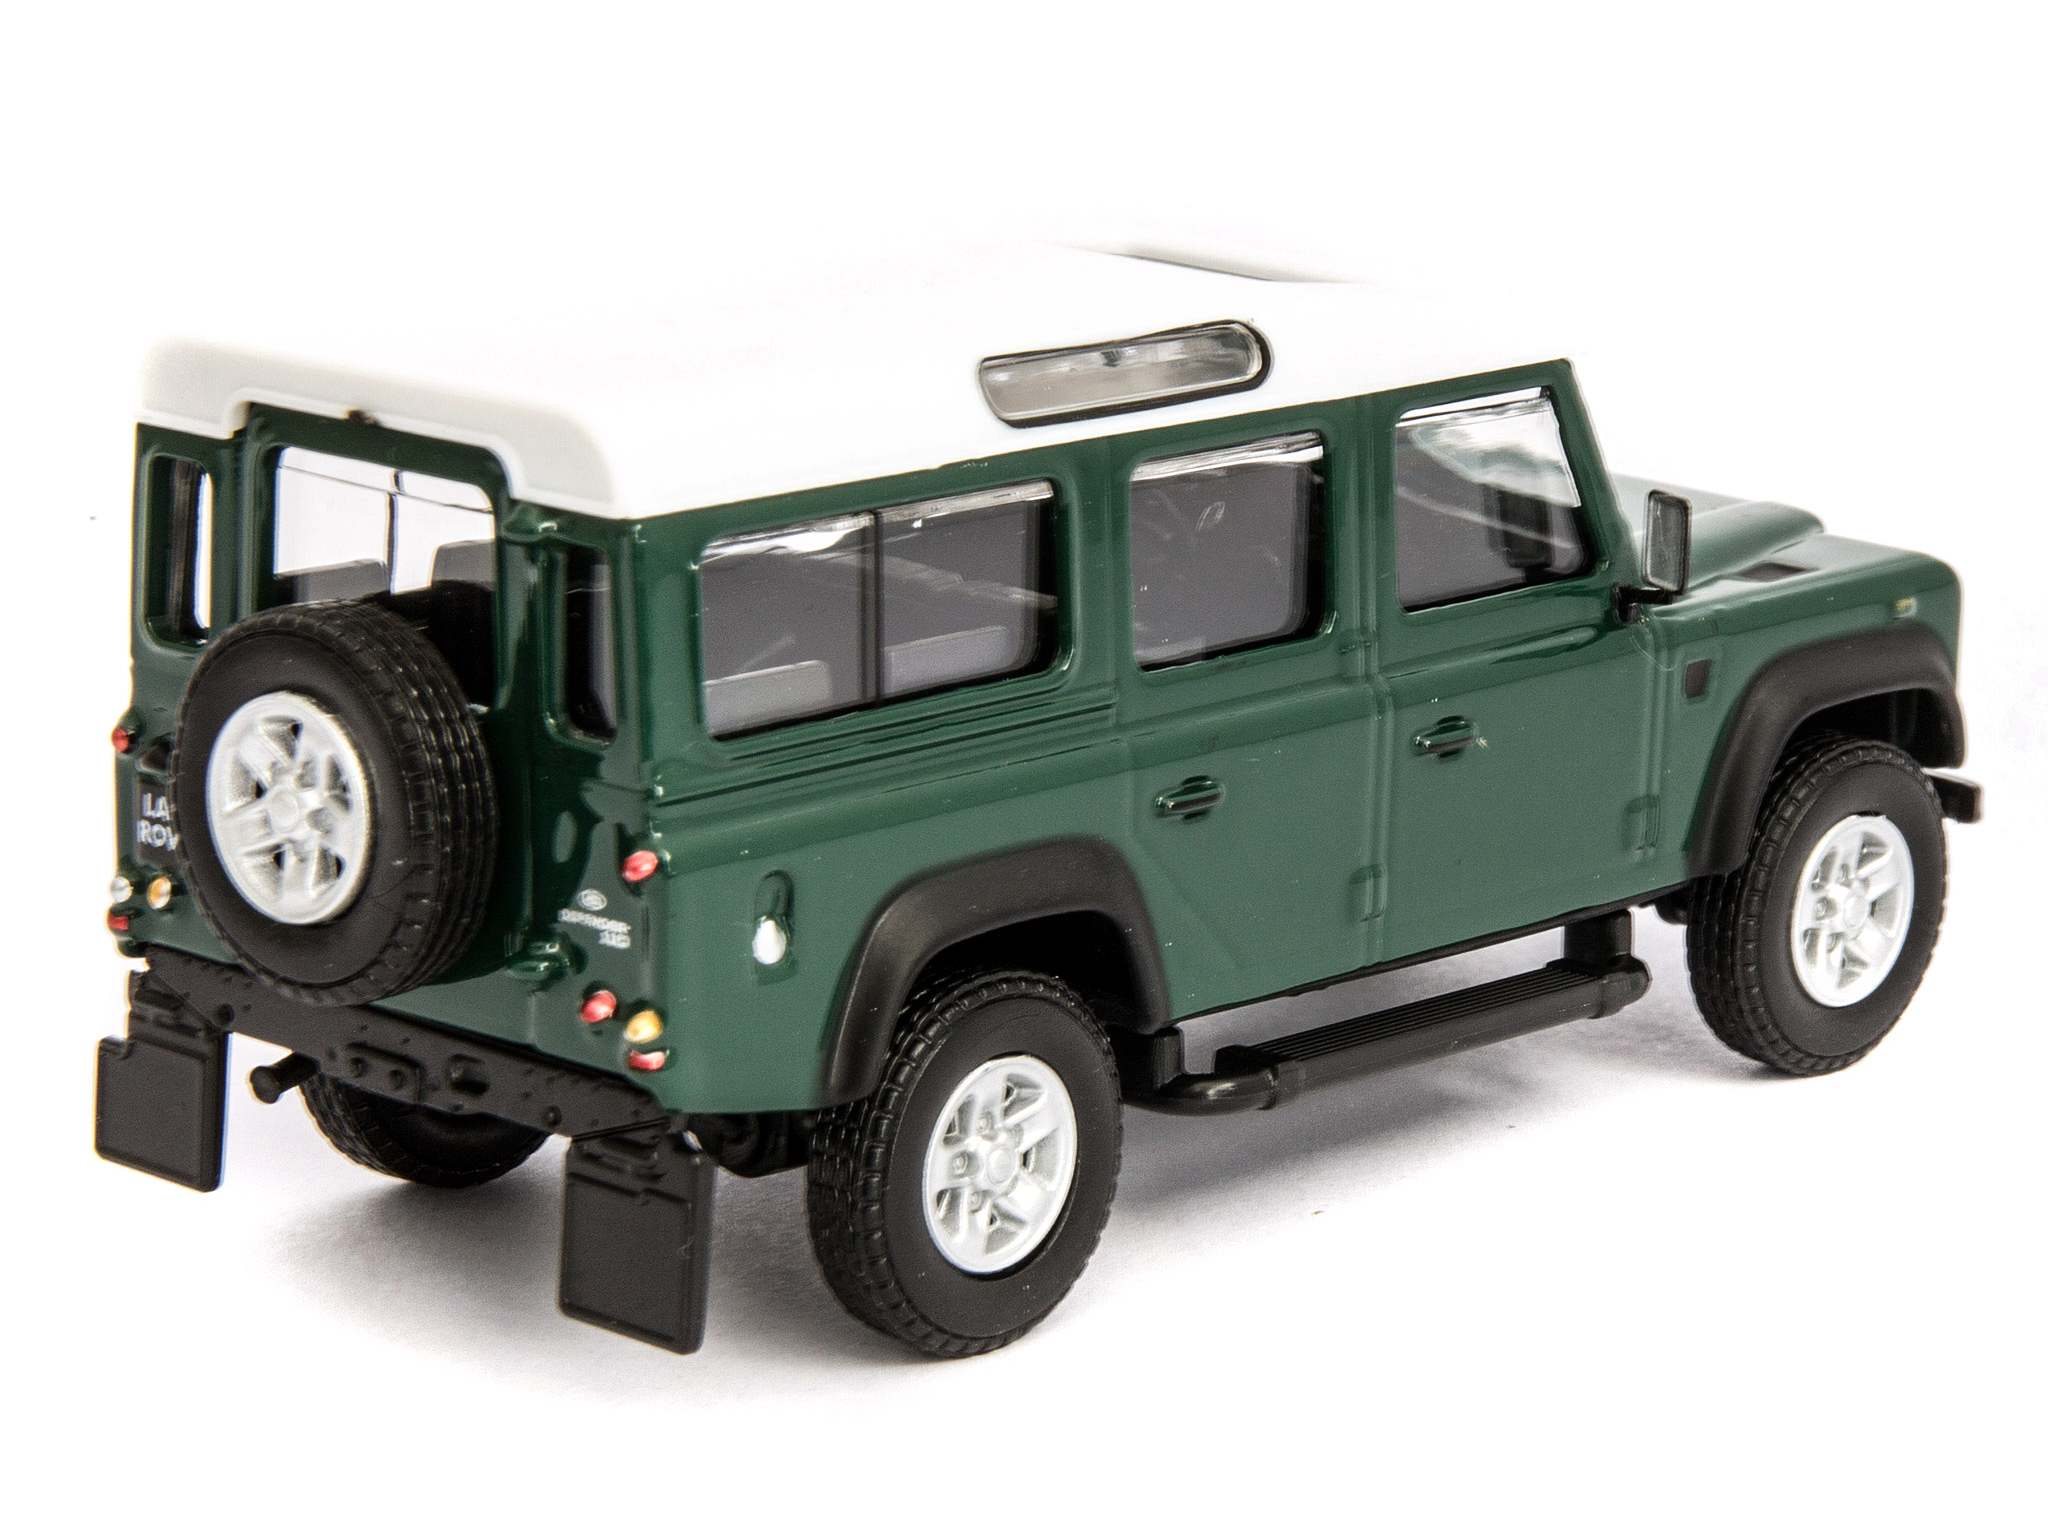 Land Rover Defender 110 Dk Green/White Roof - 1:43 Scale Diecast Model Car-Cararama-Diecast Model Centre